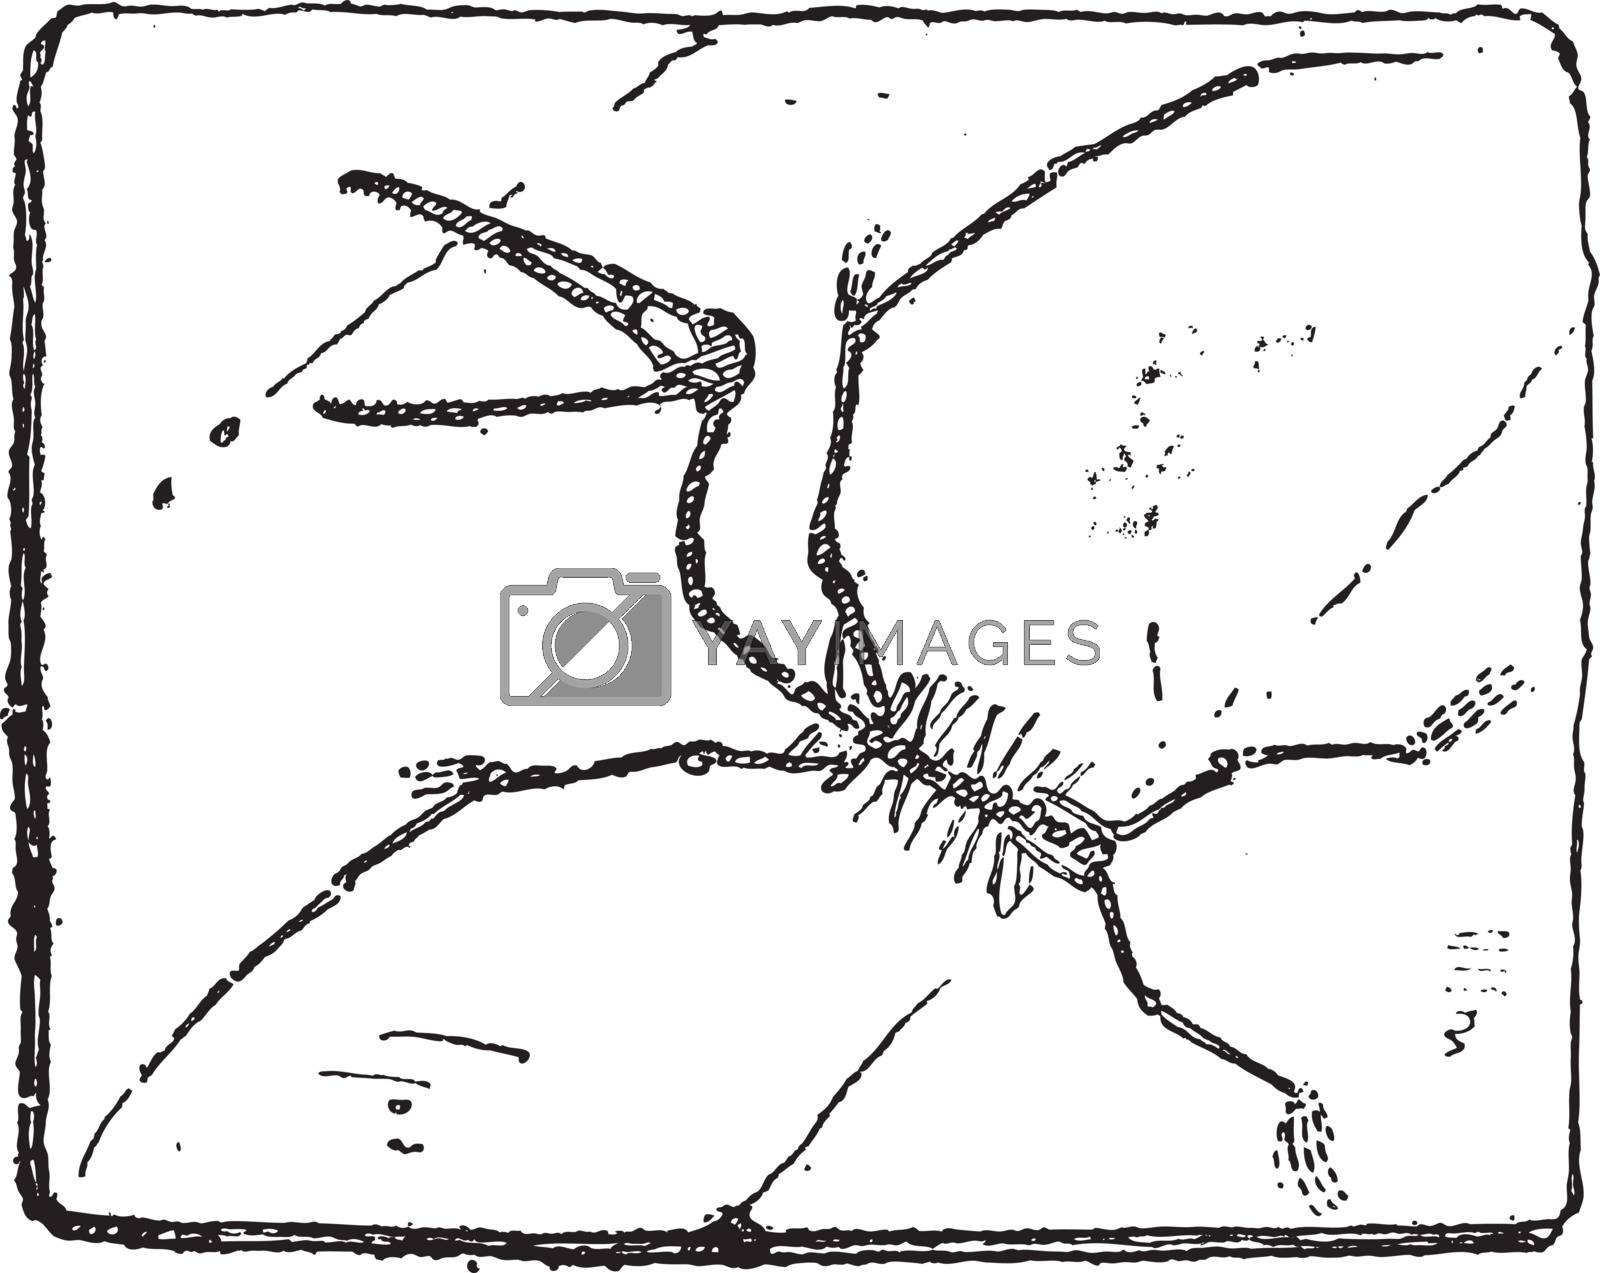 Royalty free image of Pterodactyl or Pterosaurs, vintage engraving. by Morphart